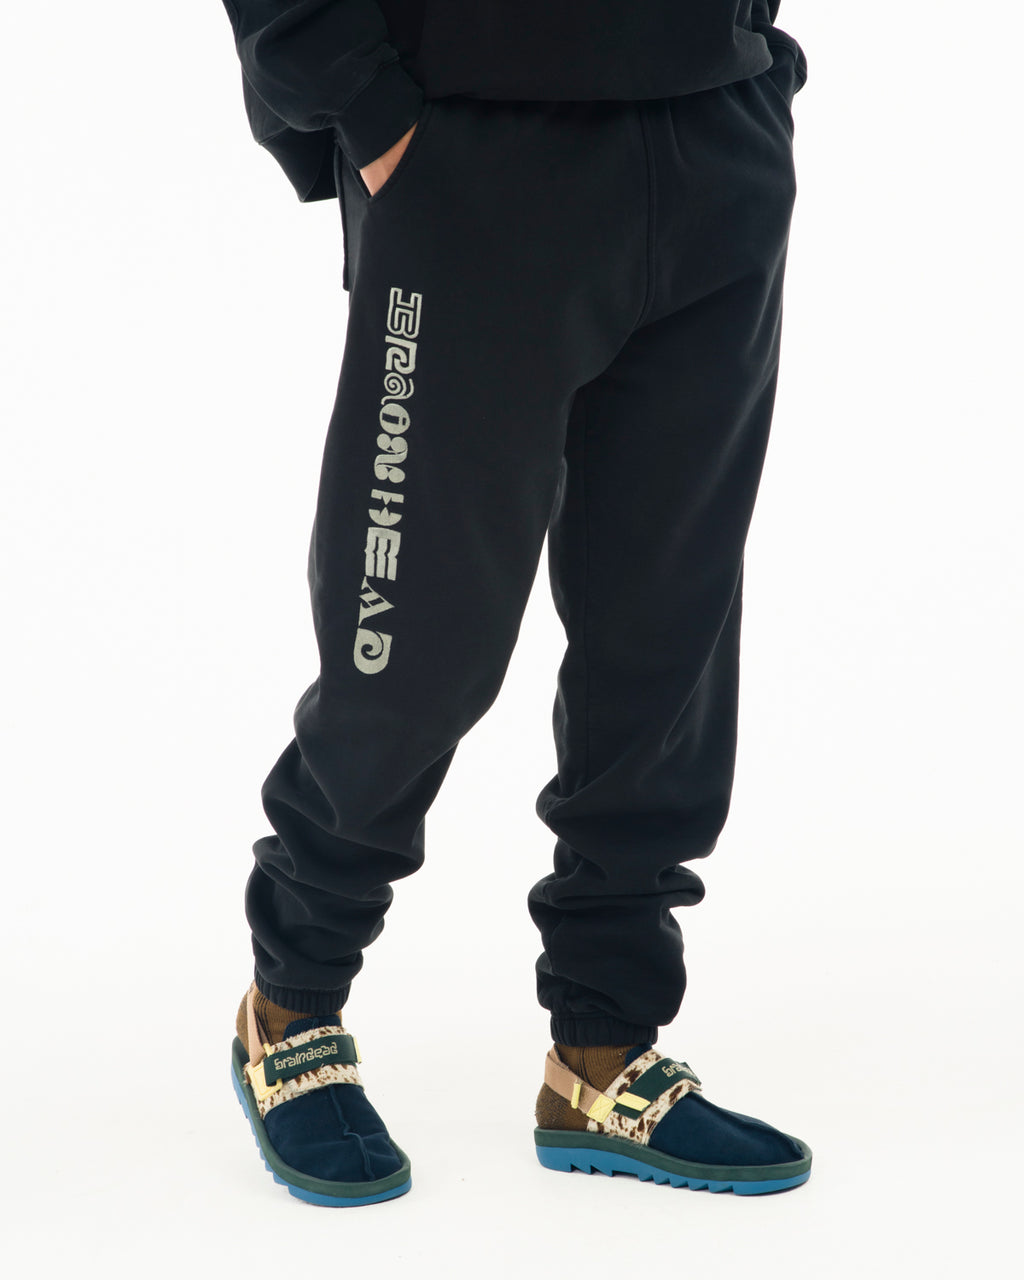 Heavyweight Embroidered Sweatpants - Black 5